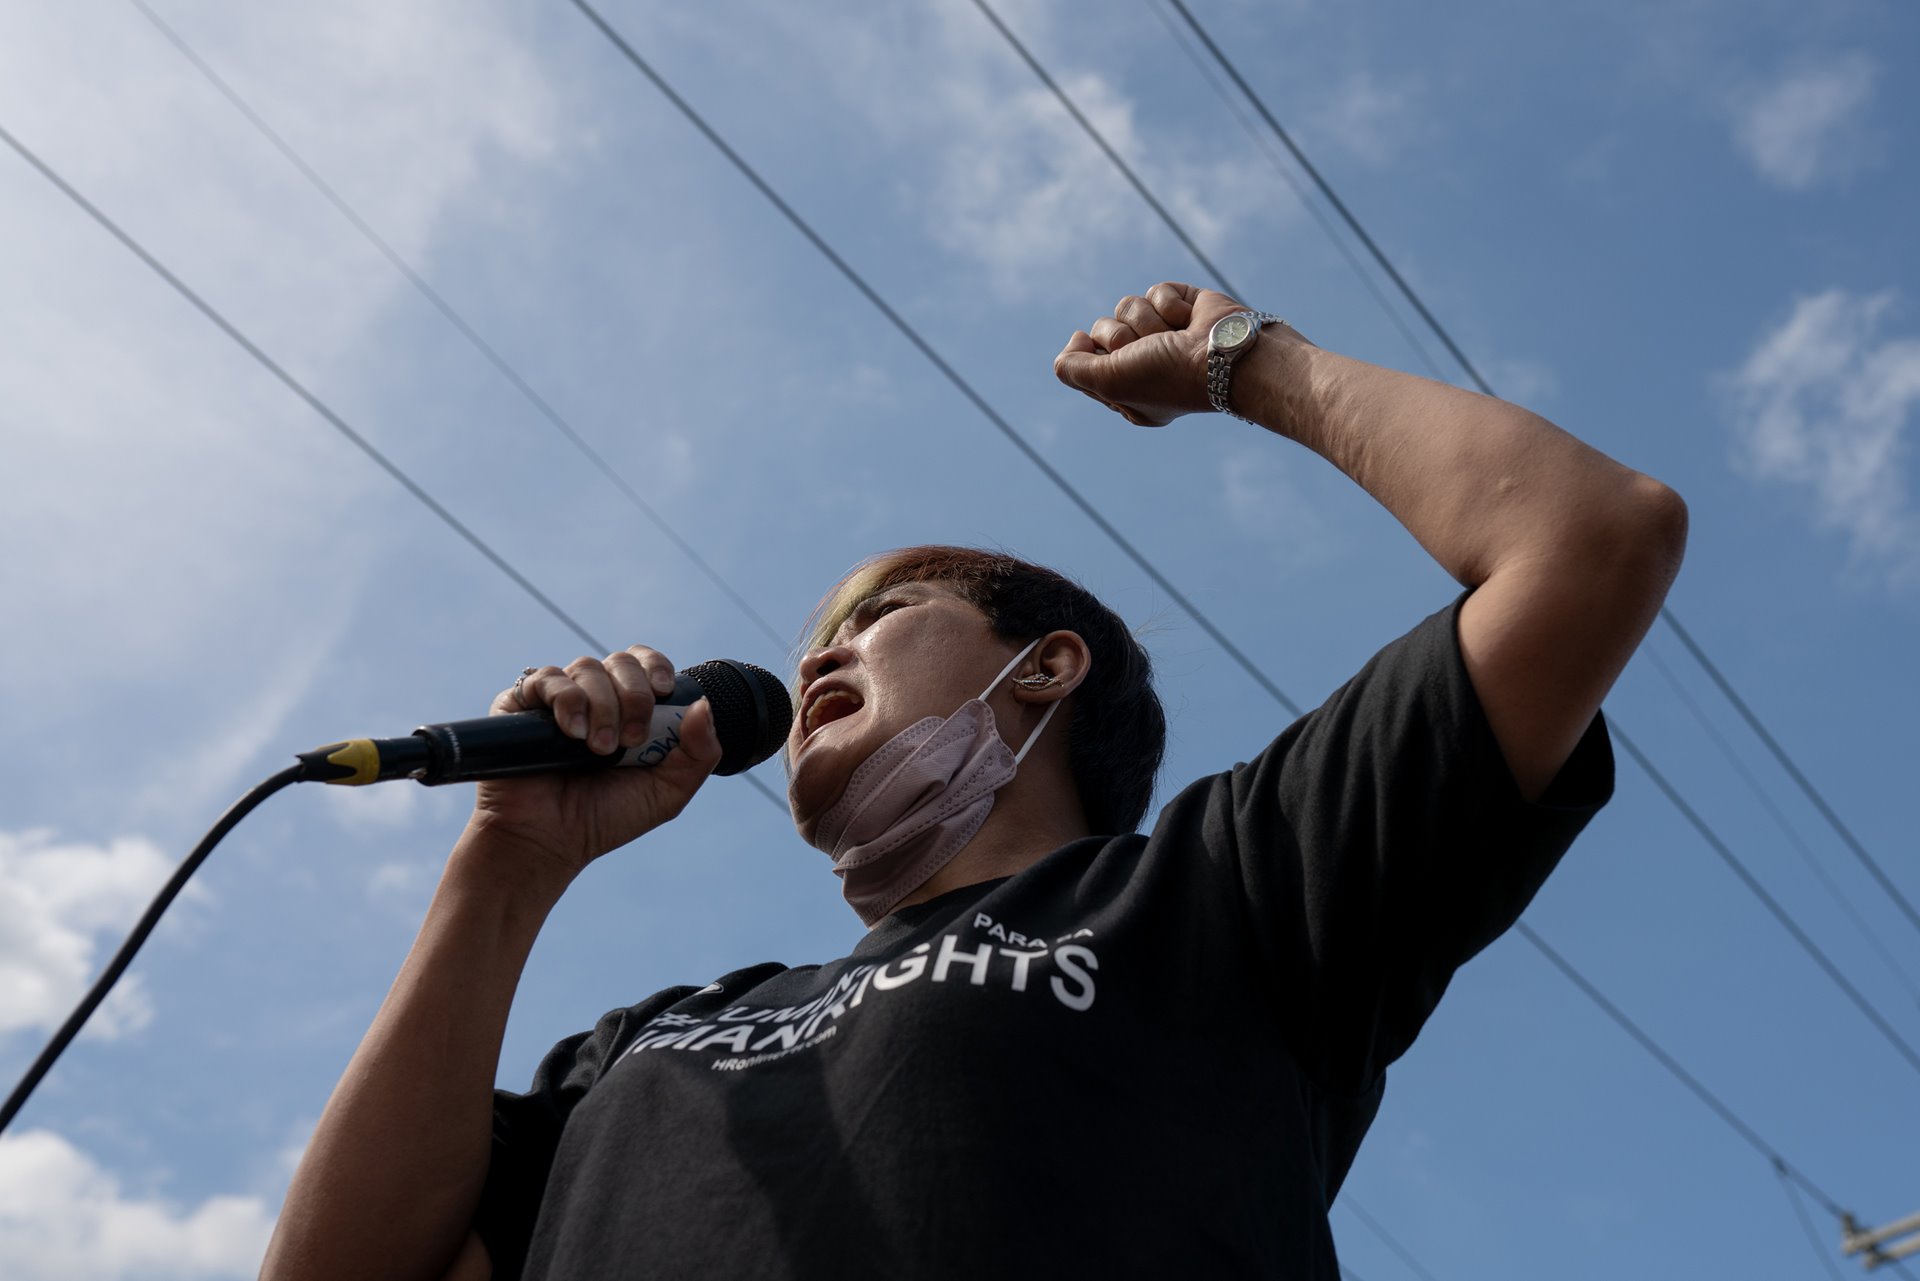 Nanette Castillo speaks on a makeshift stage during a Human Rights Day protest in Quezon City, the Philippines. Since her son&rsquo;s murder by unidentified suspects in 2017, she has transformed her grief to activism, volunteering for advocacy groups and participating in protests against such killings.